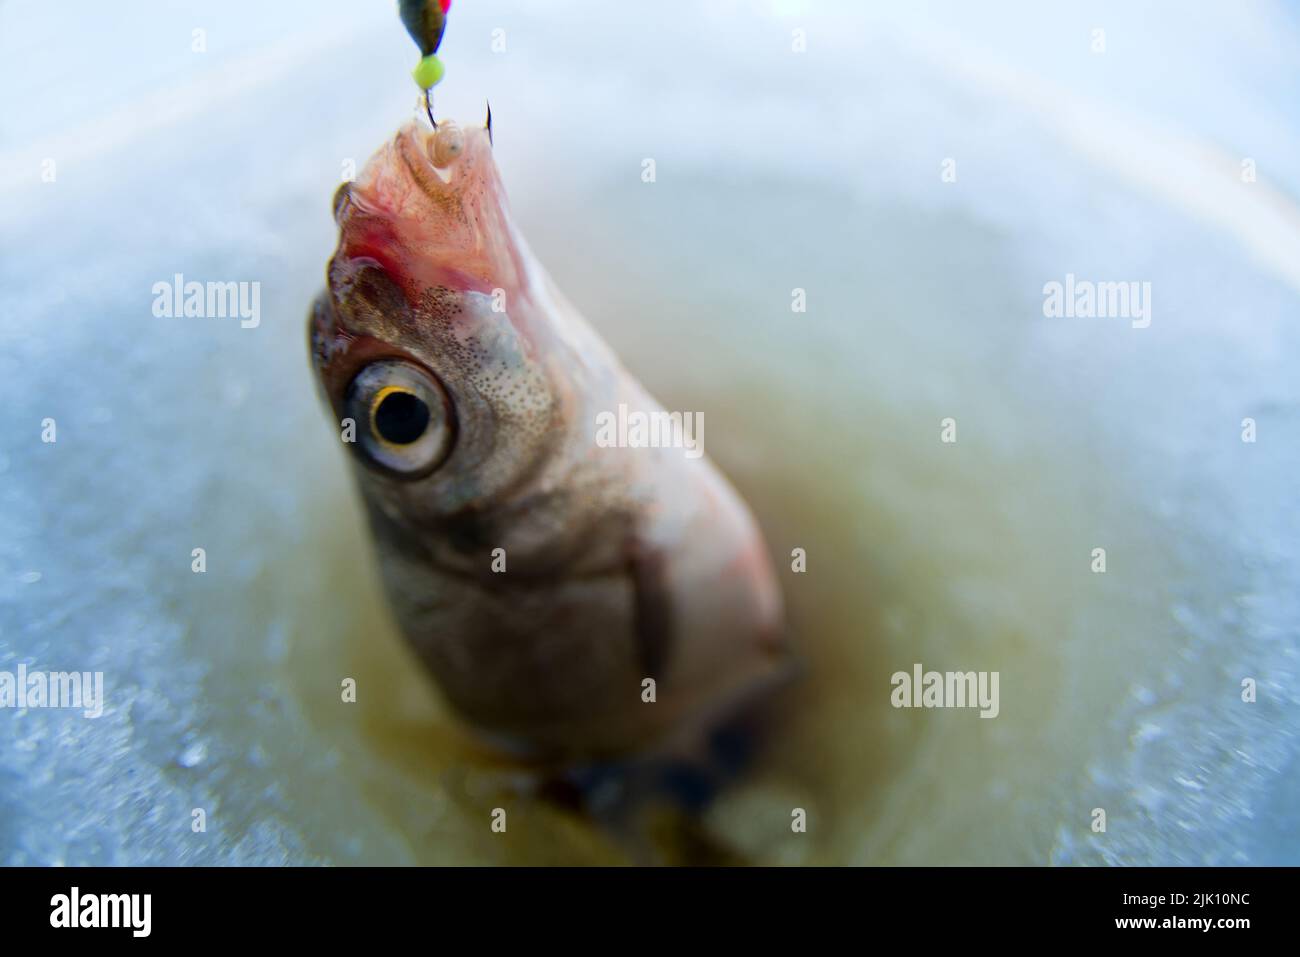 Ice recreational fishing. A picture of ruff fishing with a hole and scoot. A fish-eye lens is used Stock Photo